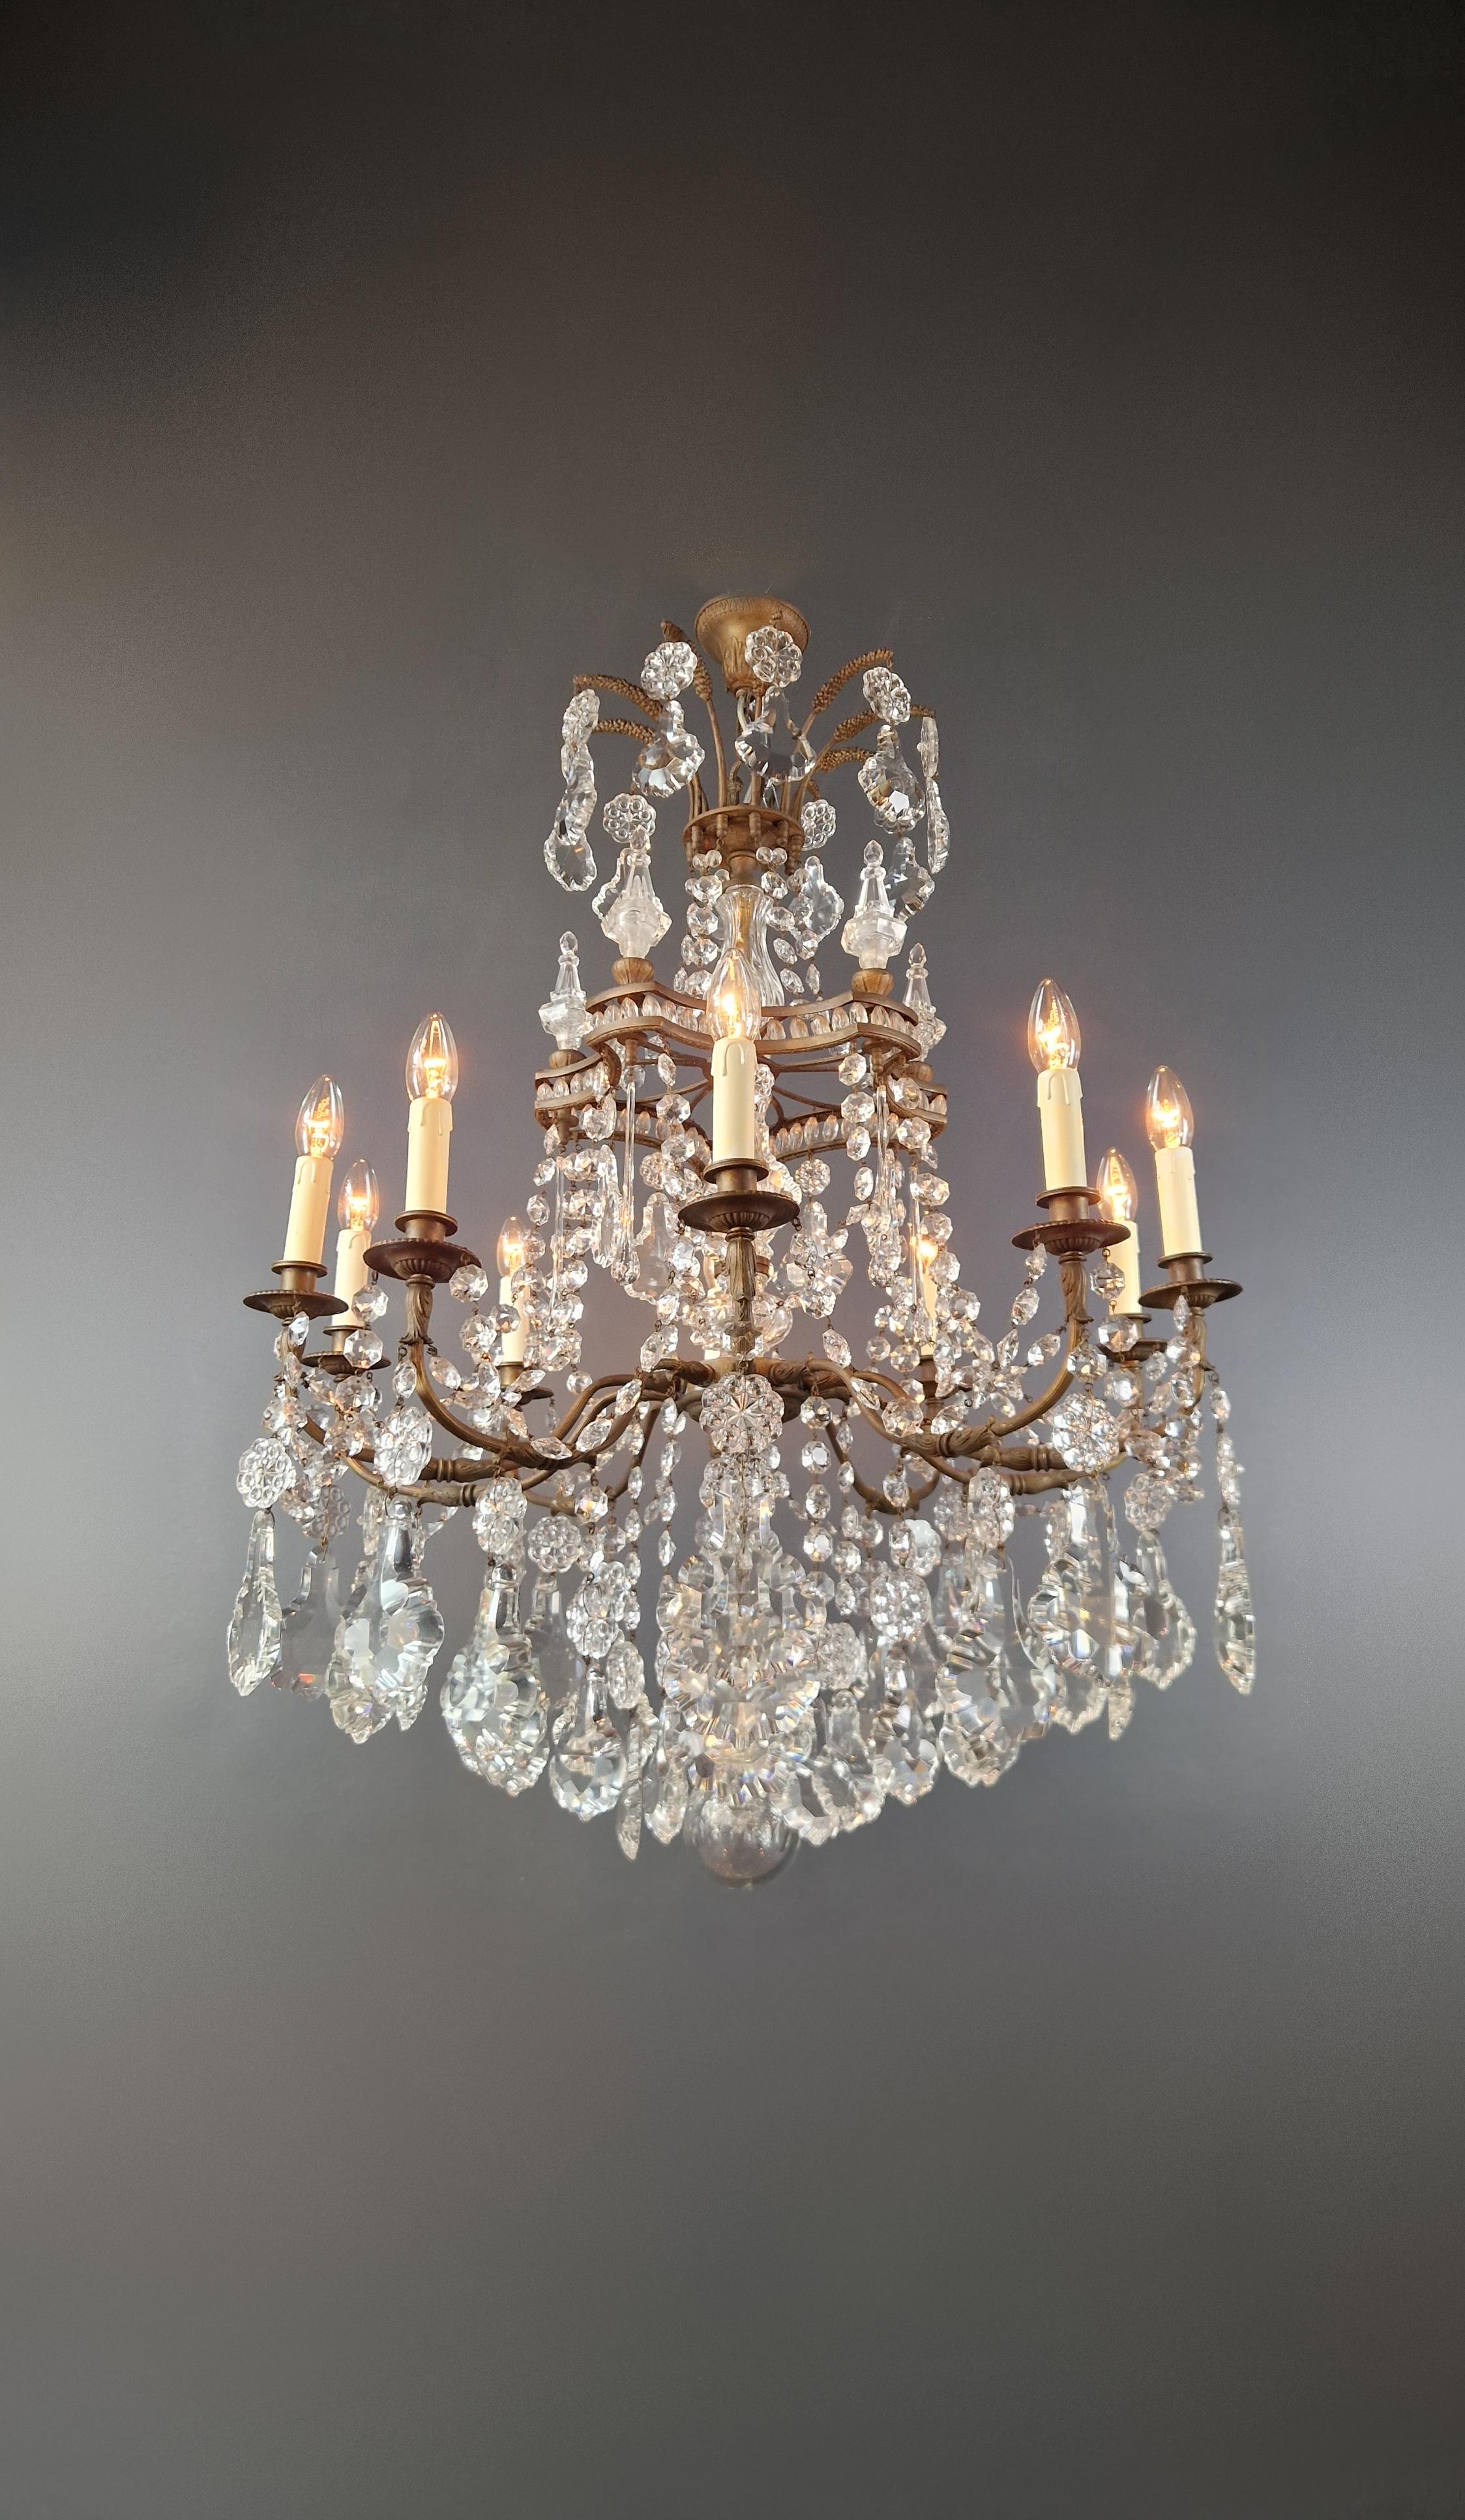 Hand-Knotted Art Nouveau Crystal Chandelier Brass Large Crystals Traditional Antique Ceiling For Sale